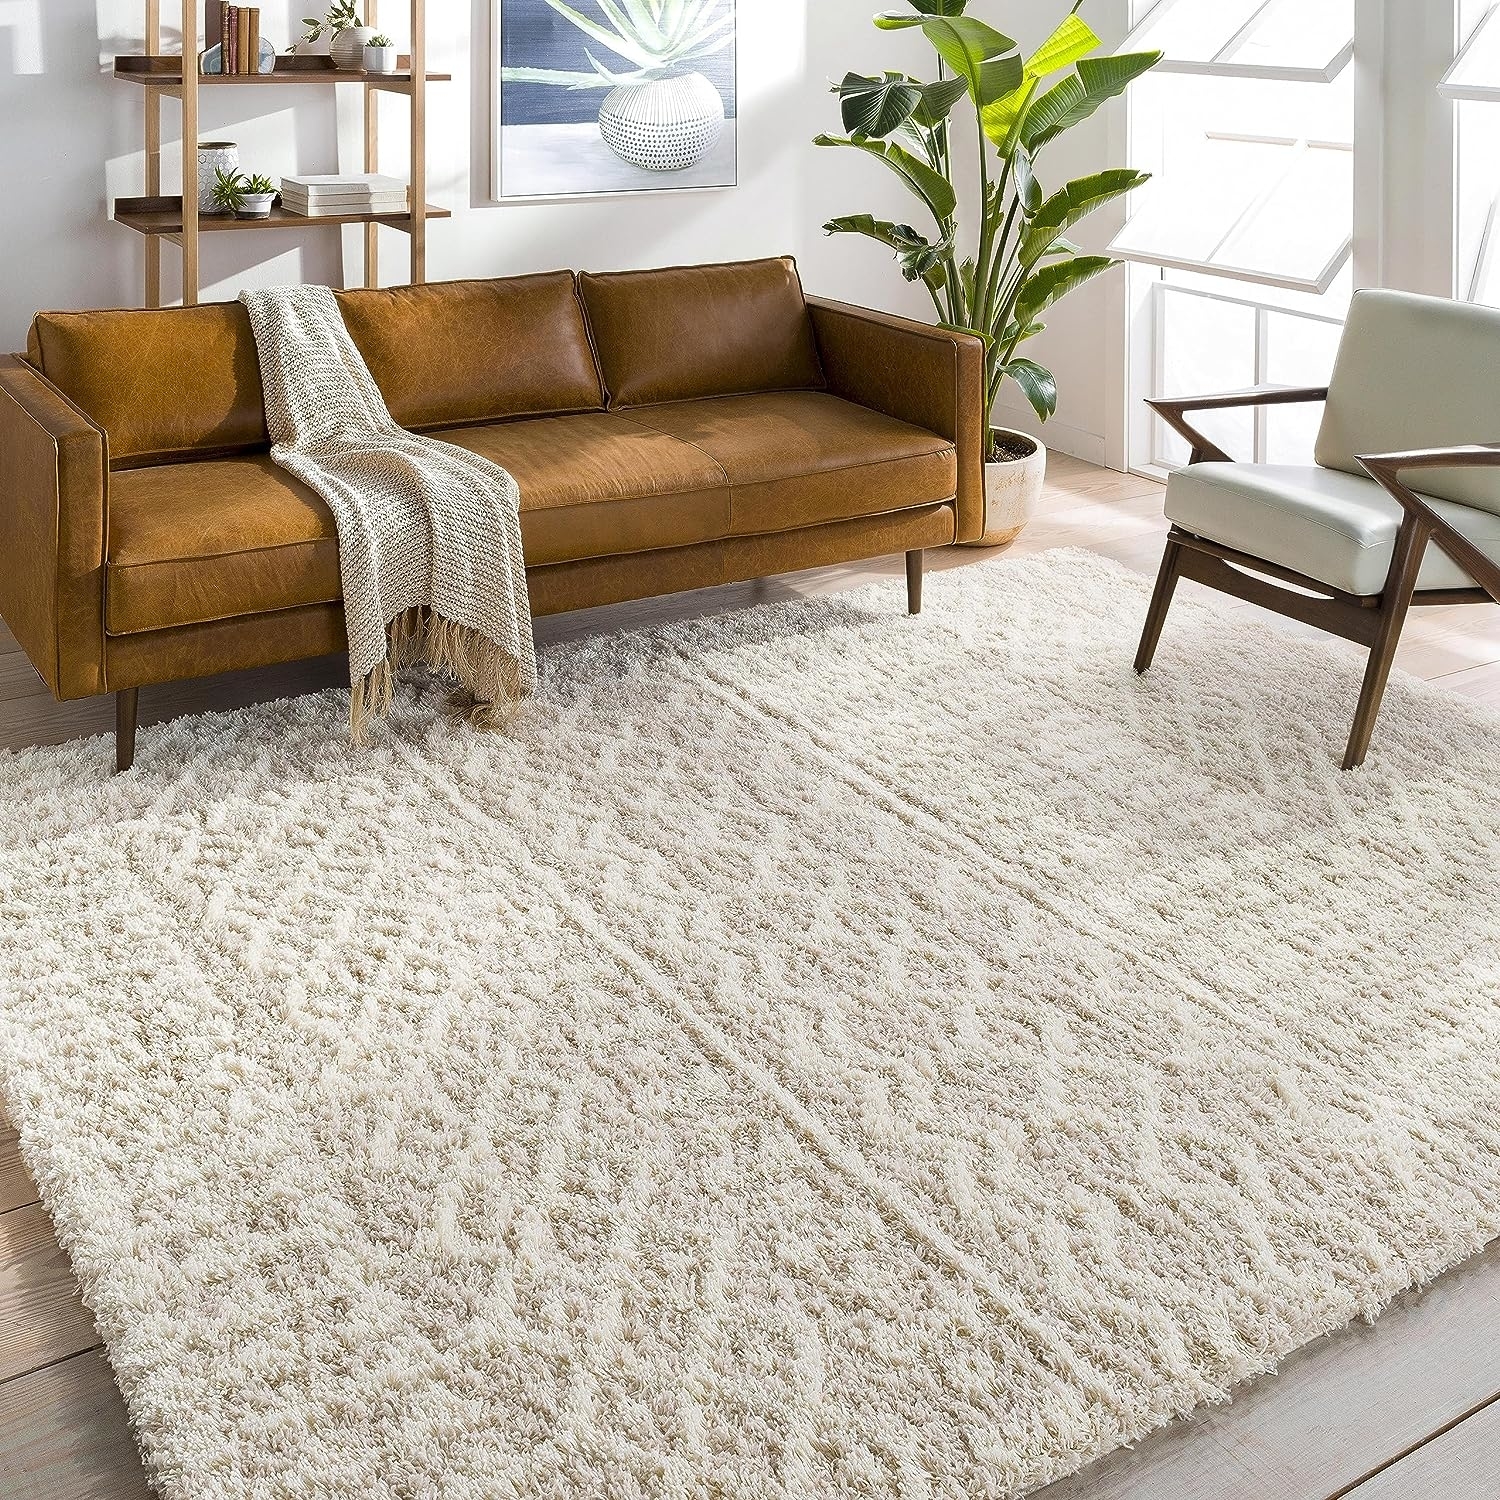 The area rug in a living room